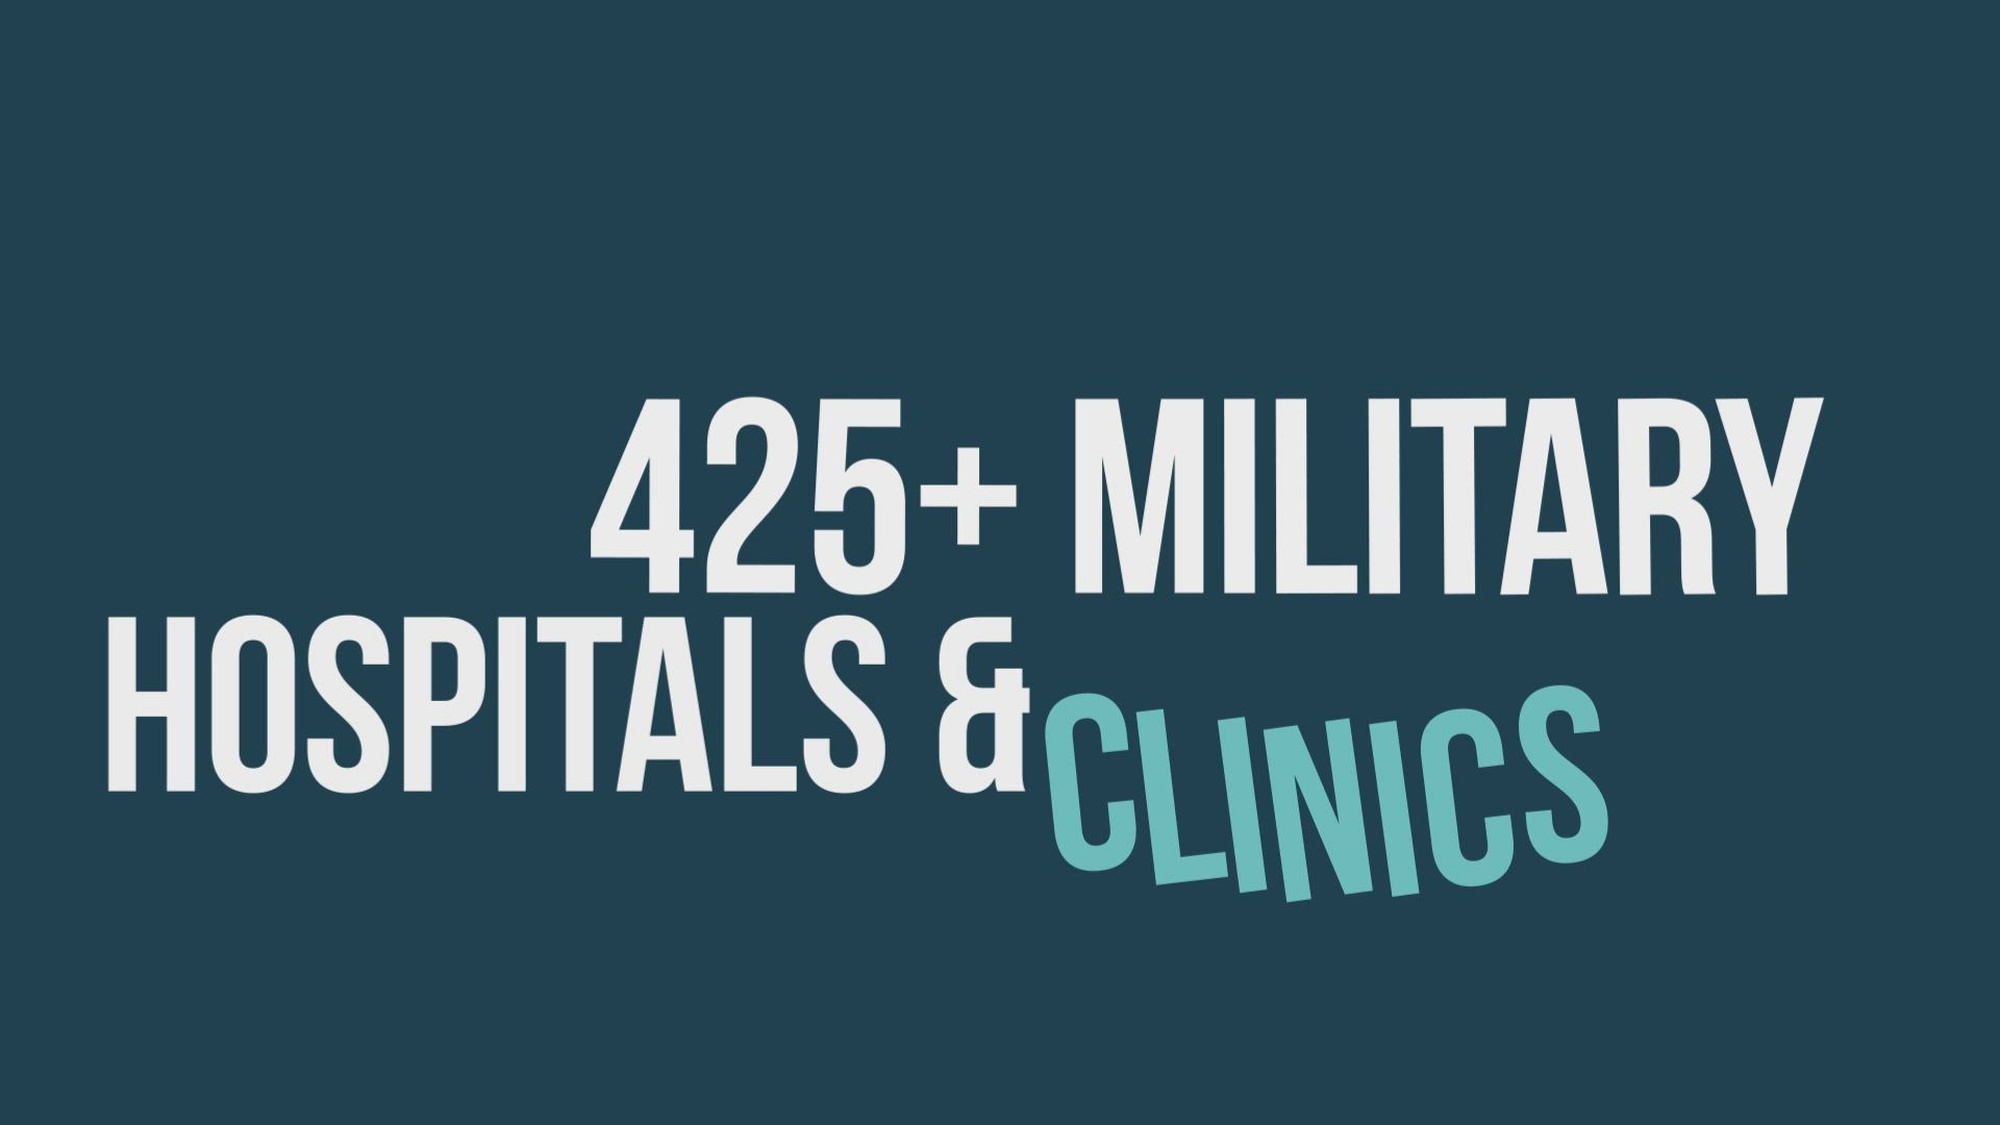 All year long, patient safety is one of the top priorities for the Defense Health Agency. Patient safety means providing ready, reliable care to service members, veterans, and dependents no matter the circumstance.